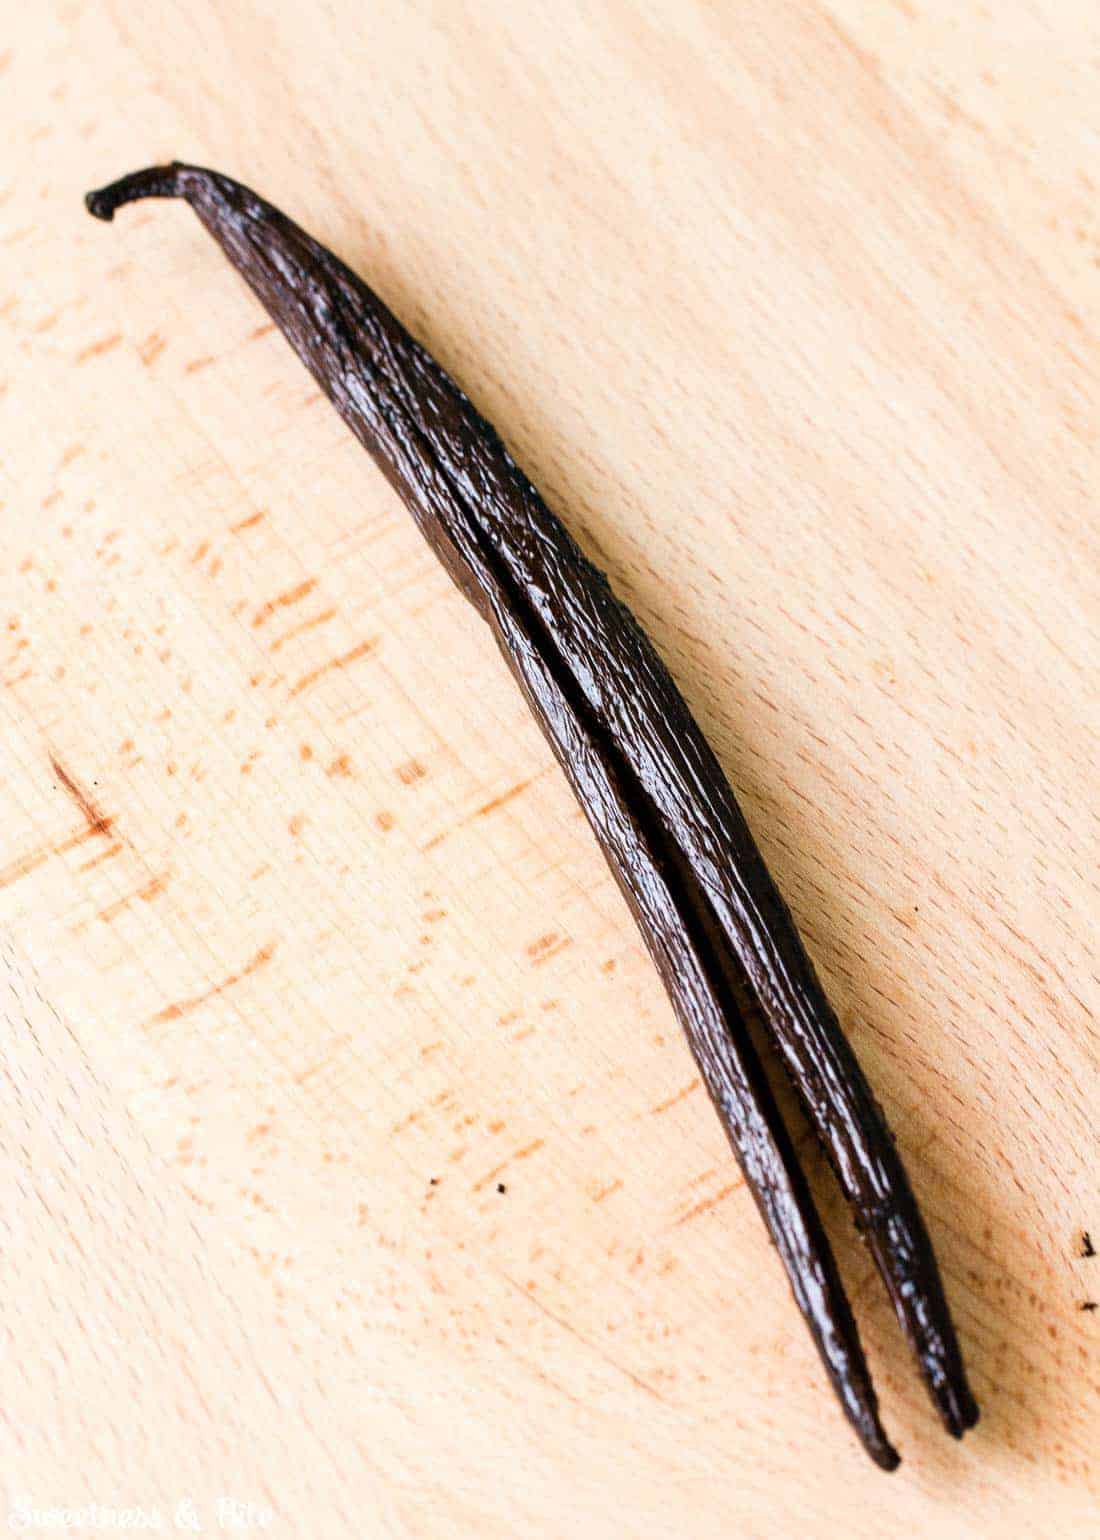 A vanilla bean that's been split up the middle, on a wooden board.